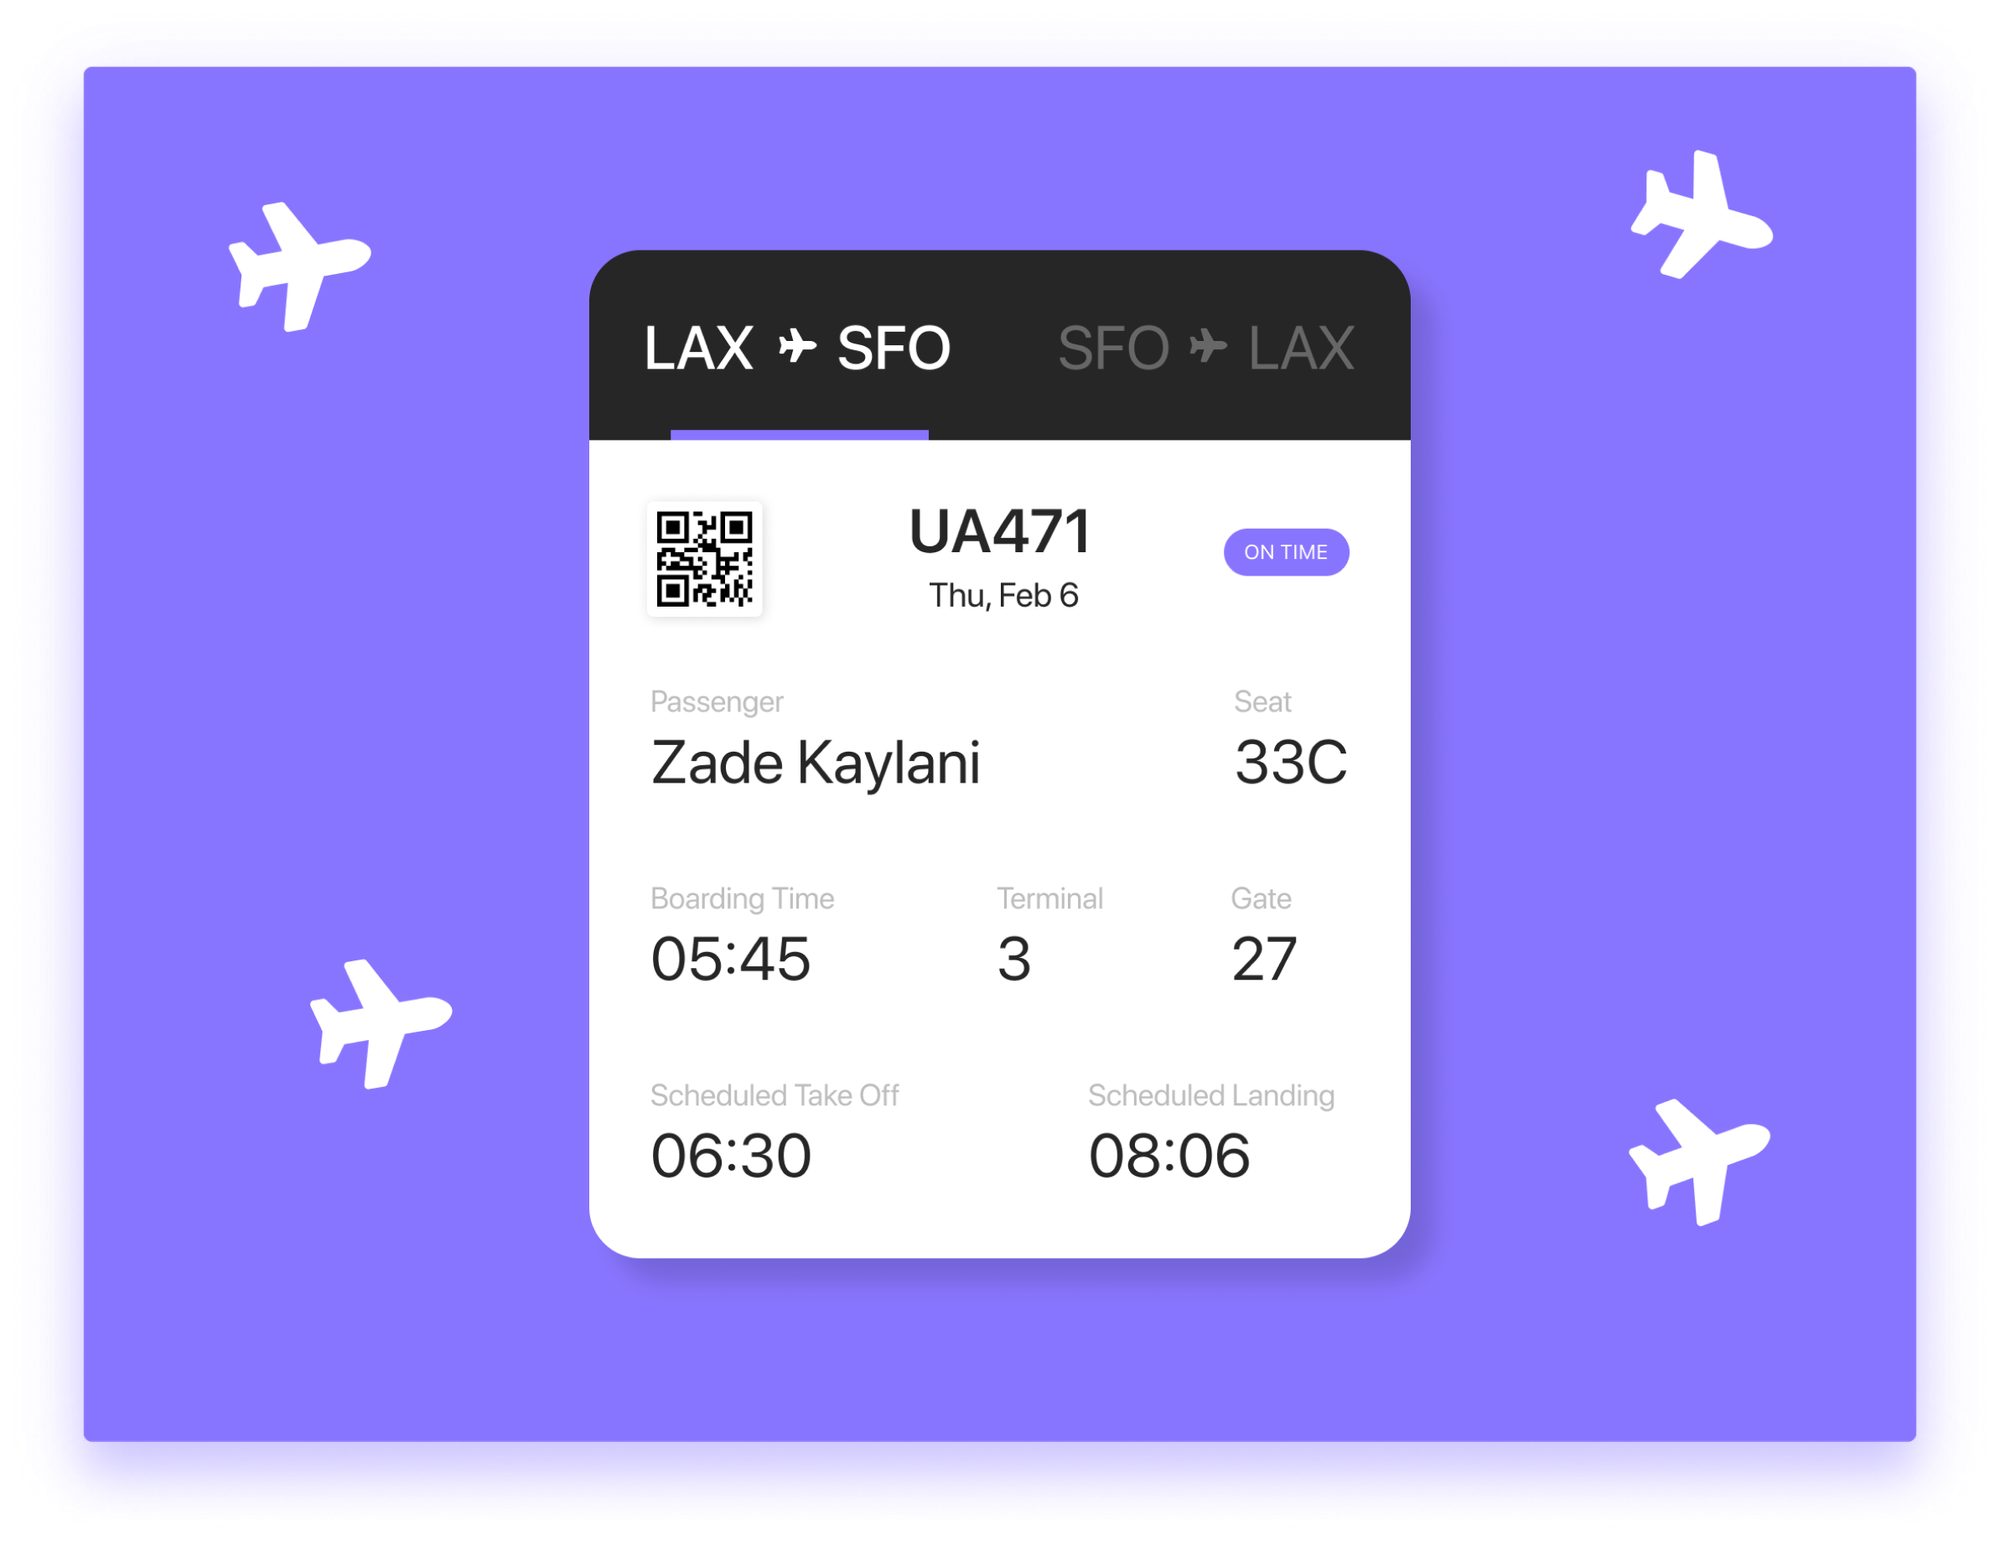 Used the flight info for my trip to San Francisco for Figma's Config 2020!